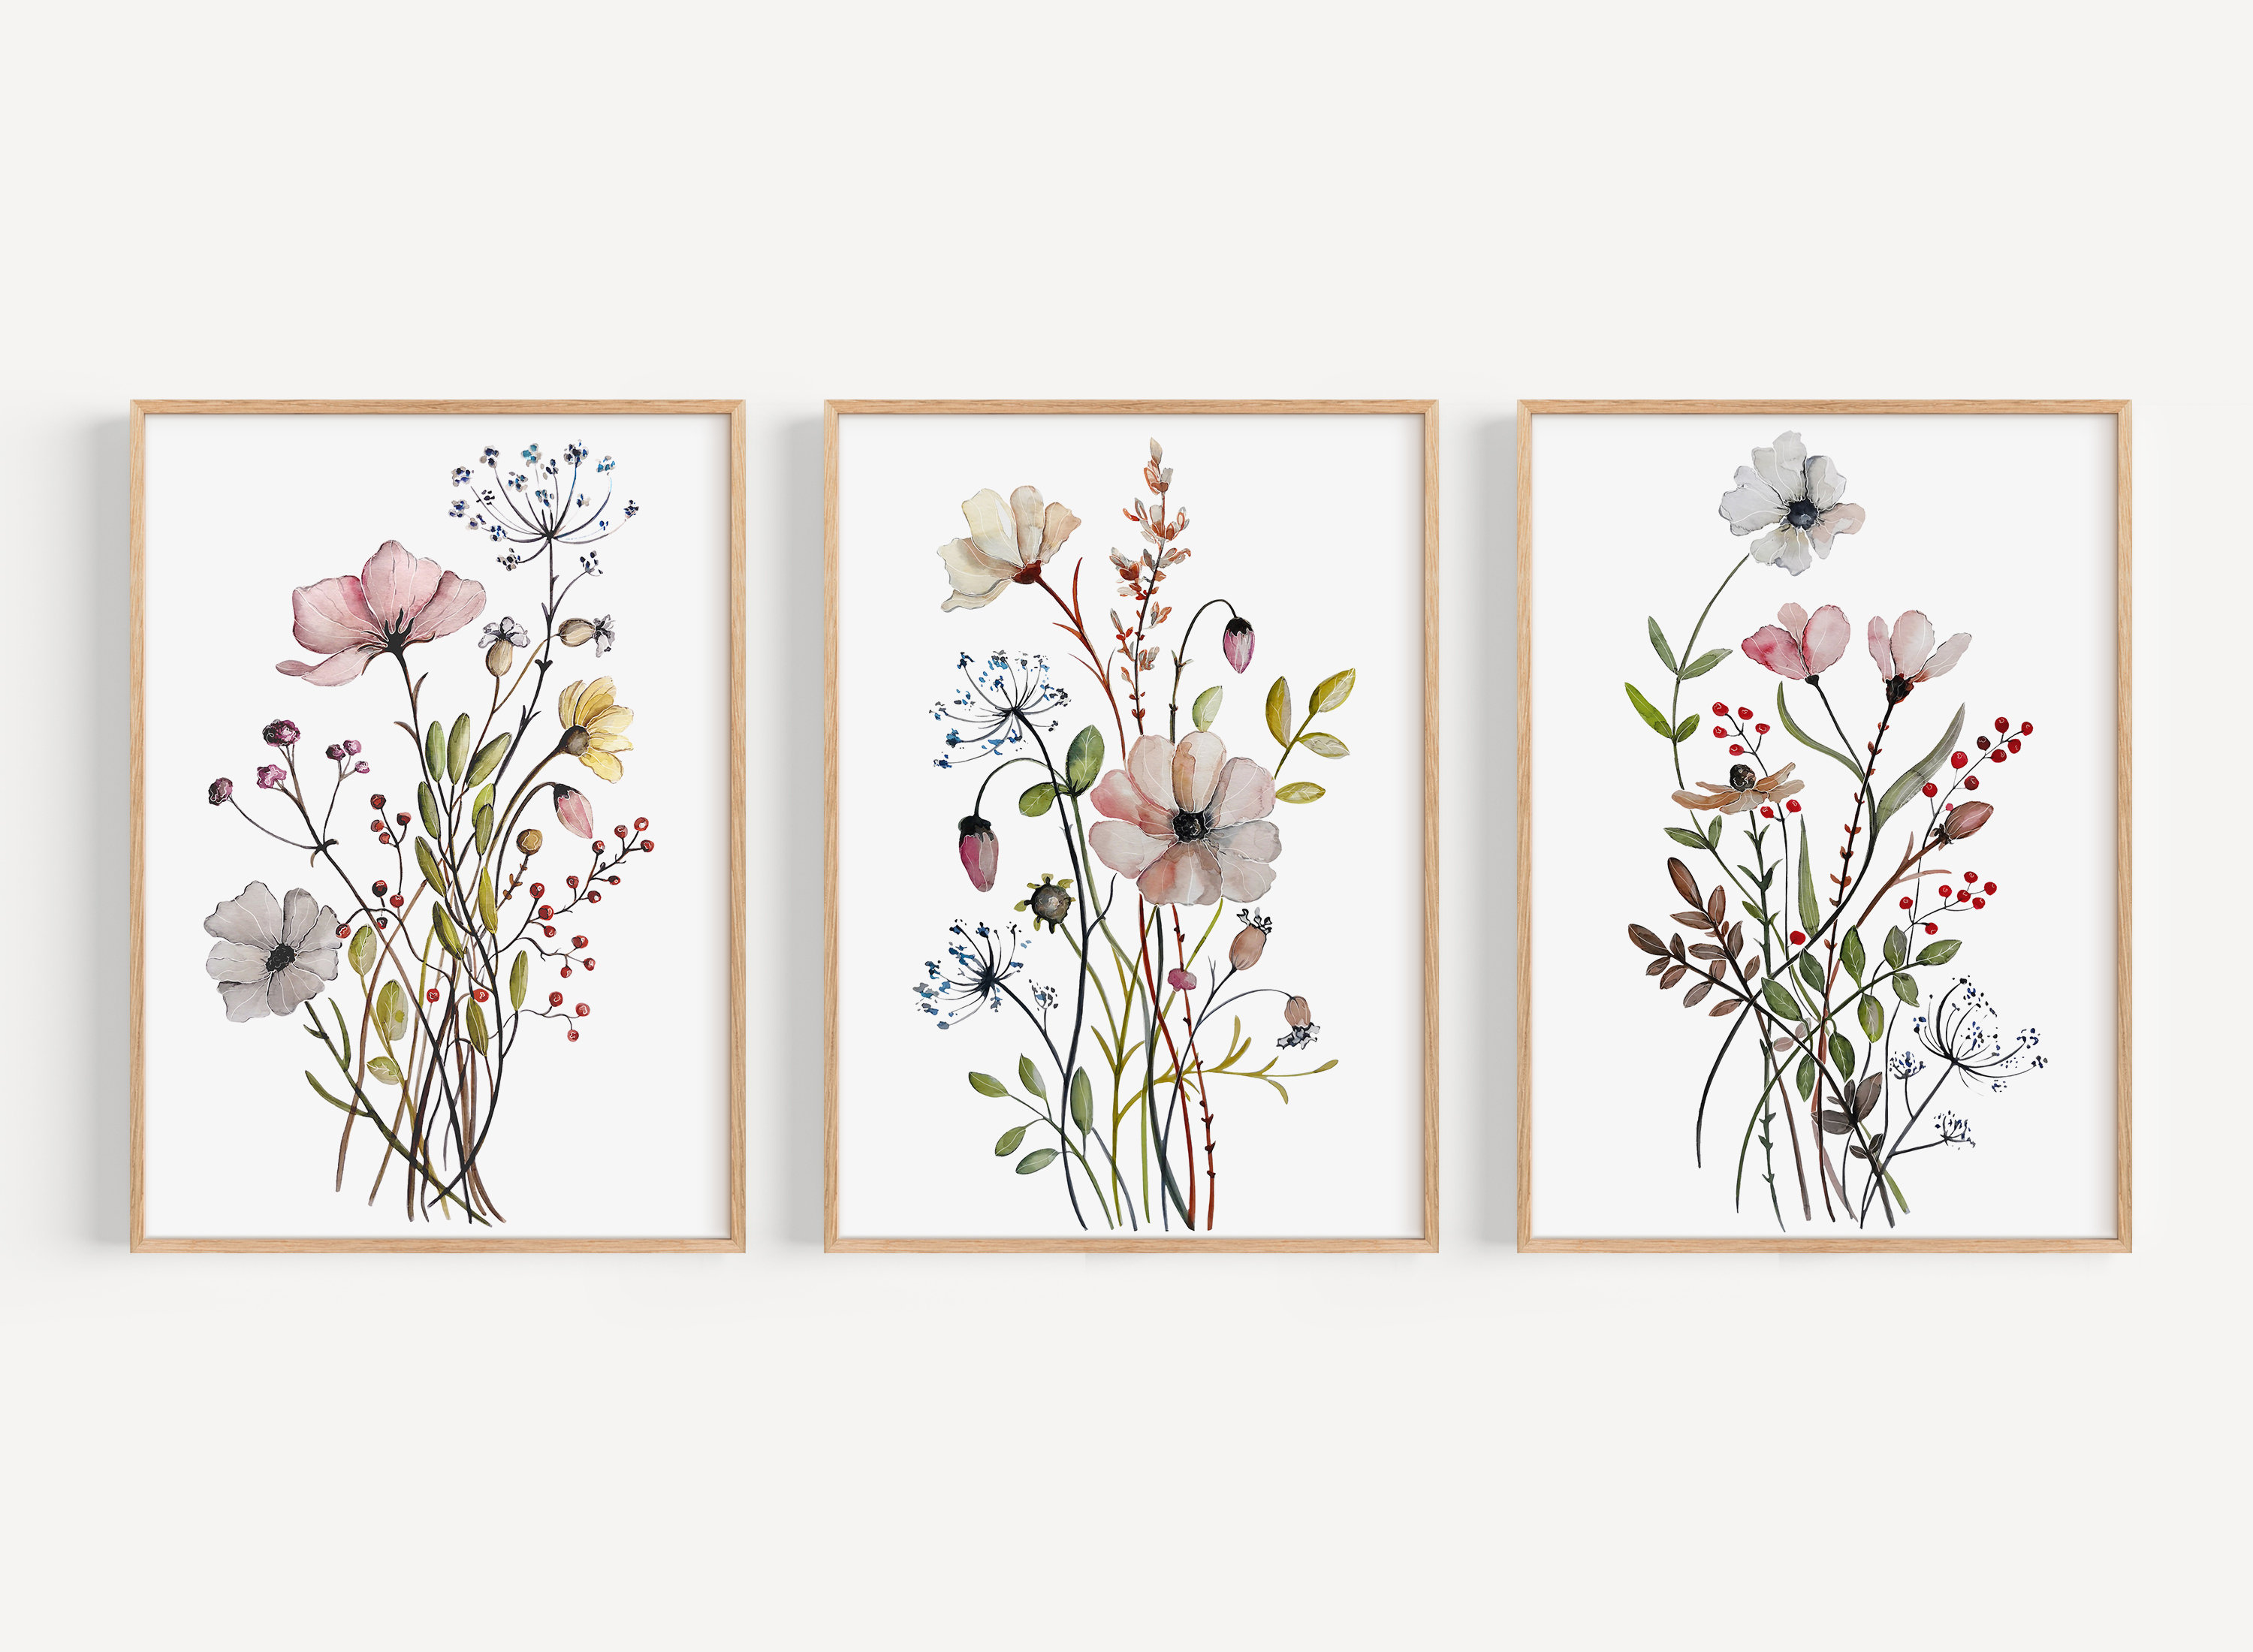 You're a Wildflower Art Print Floral Wall Art Katie 